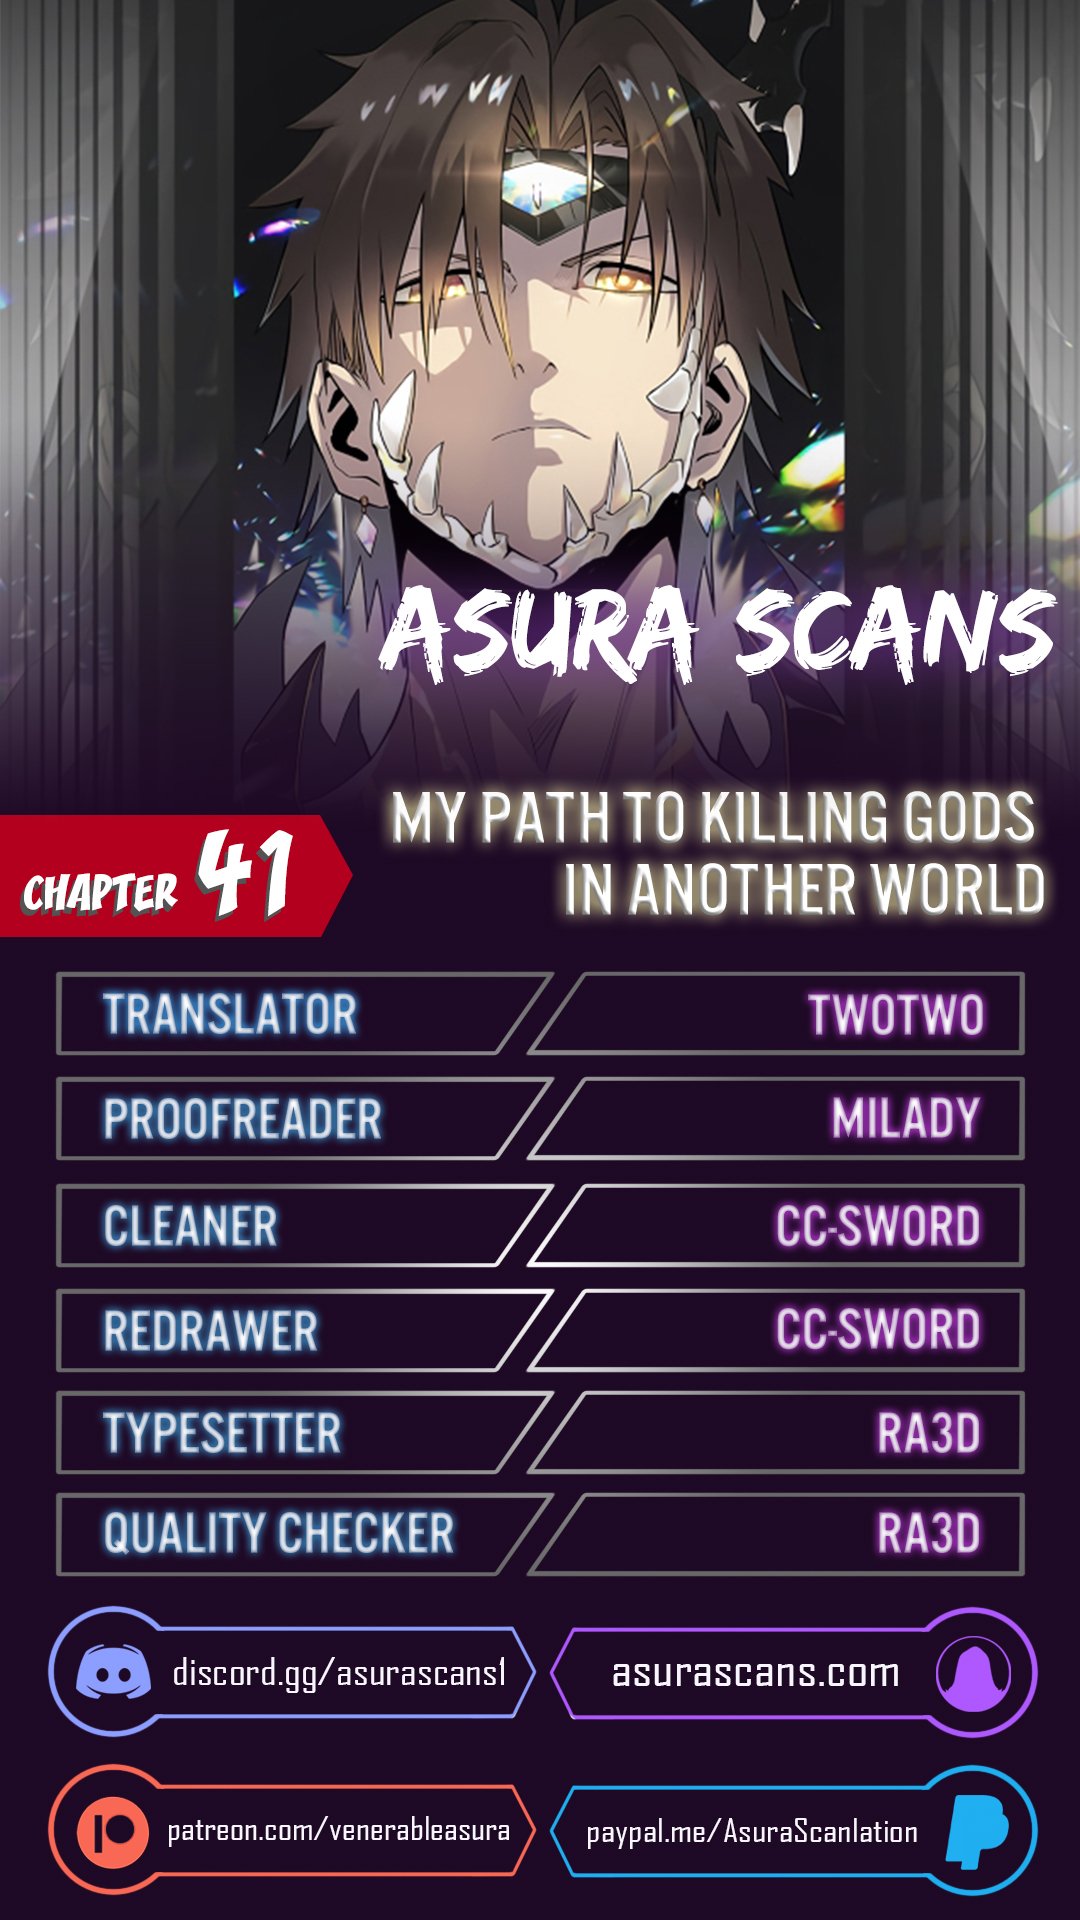 My Path to Killing Gods in Another World - Chapter 23192 - Image 1